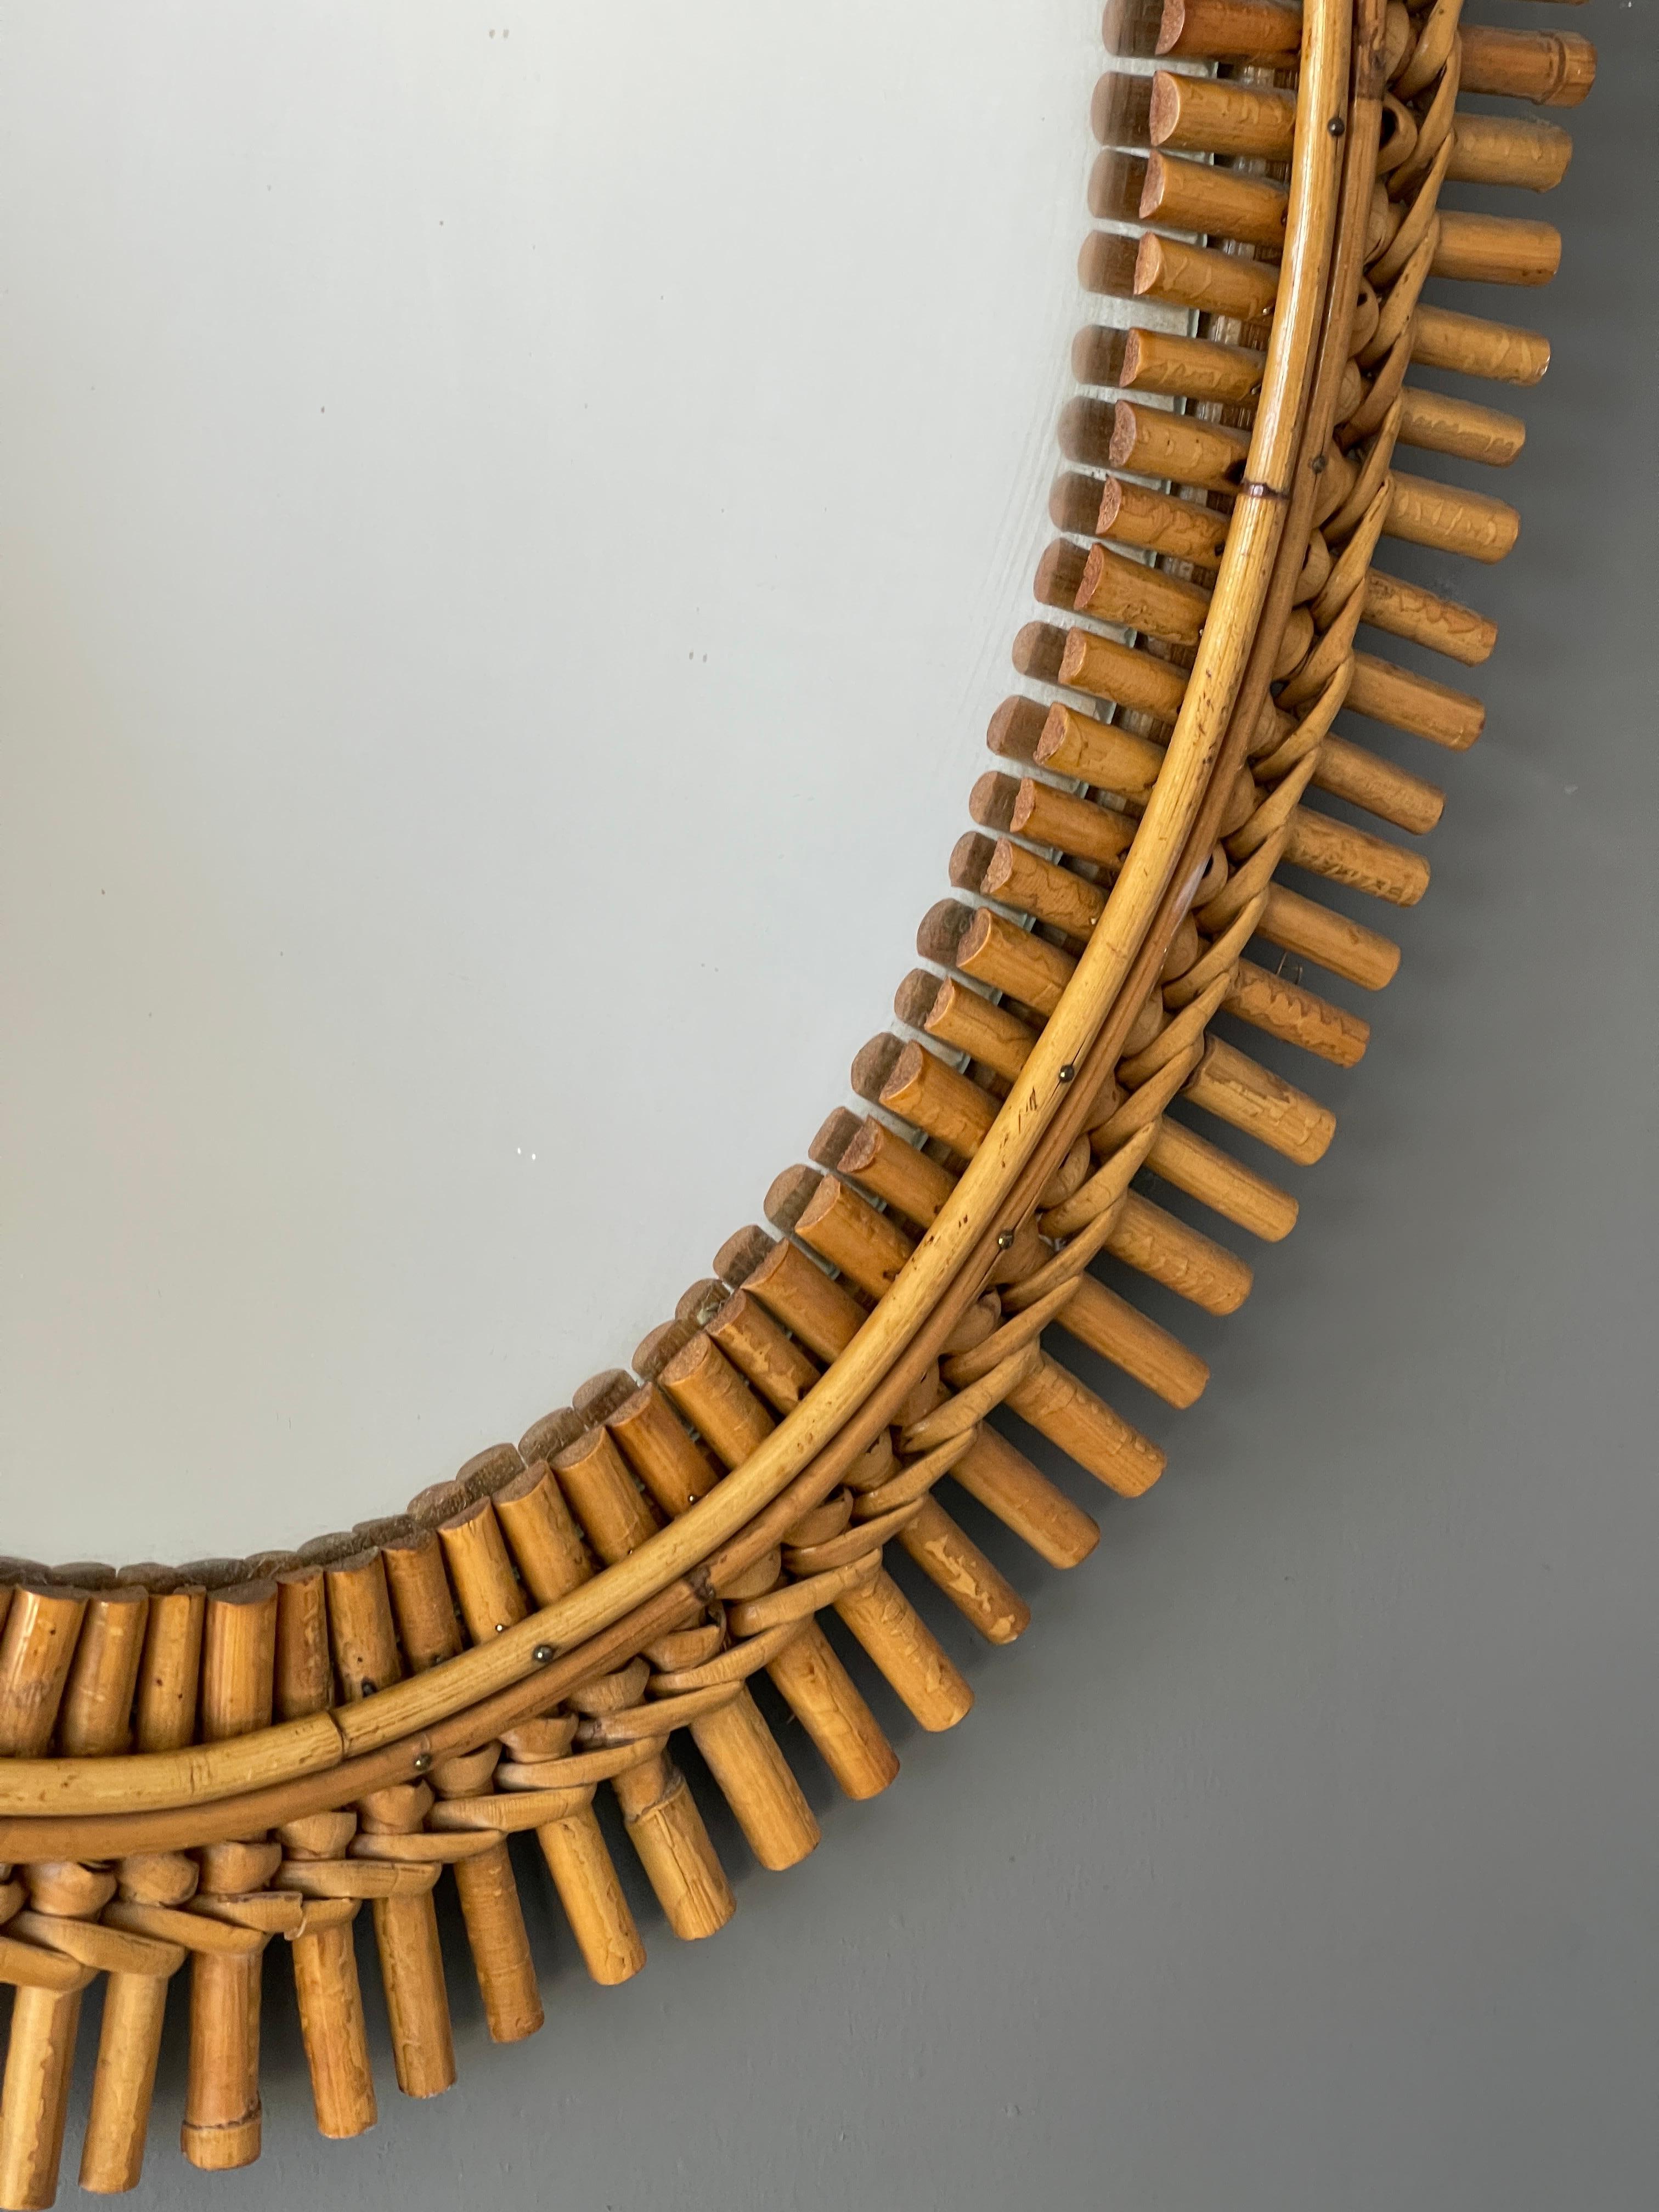 A wall mirror, produced in Italy, 1950s. Cut mirror glass is framed in bamboo and rattan

Other designers of the period include Gio Ponti, Fontana Arte, Max Ingrand, Franco Albini, and Josef Frank.